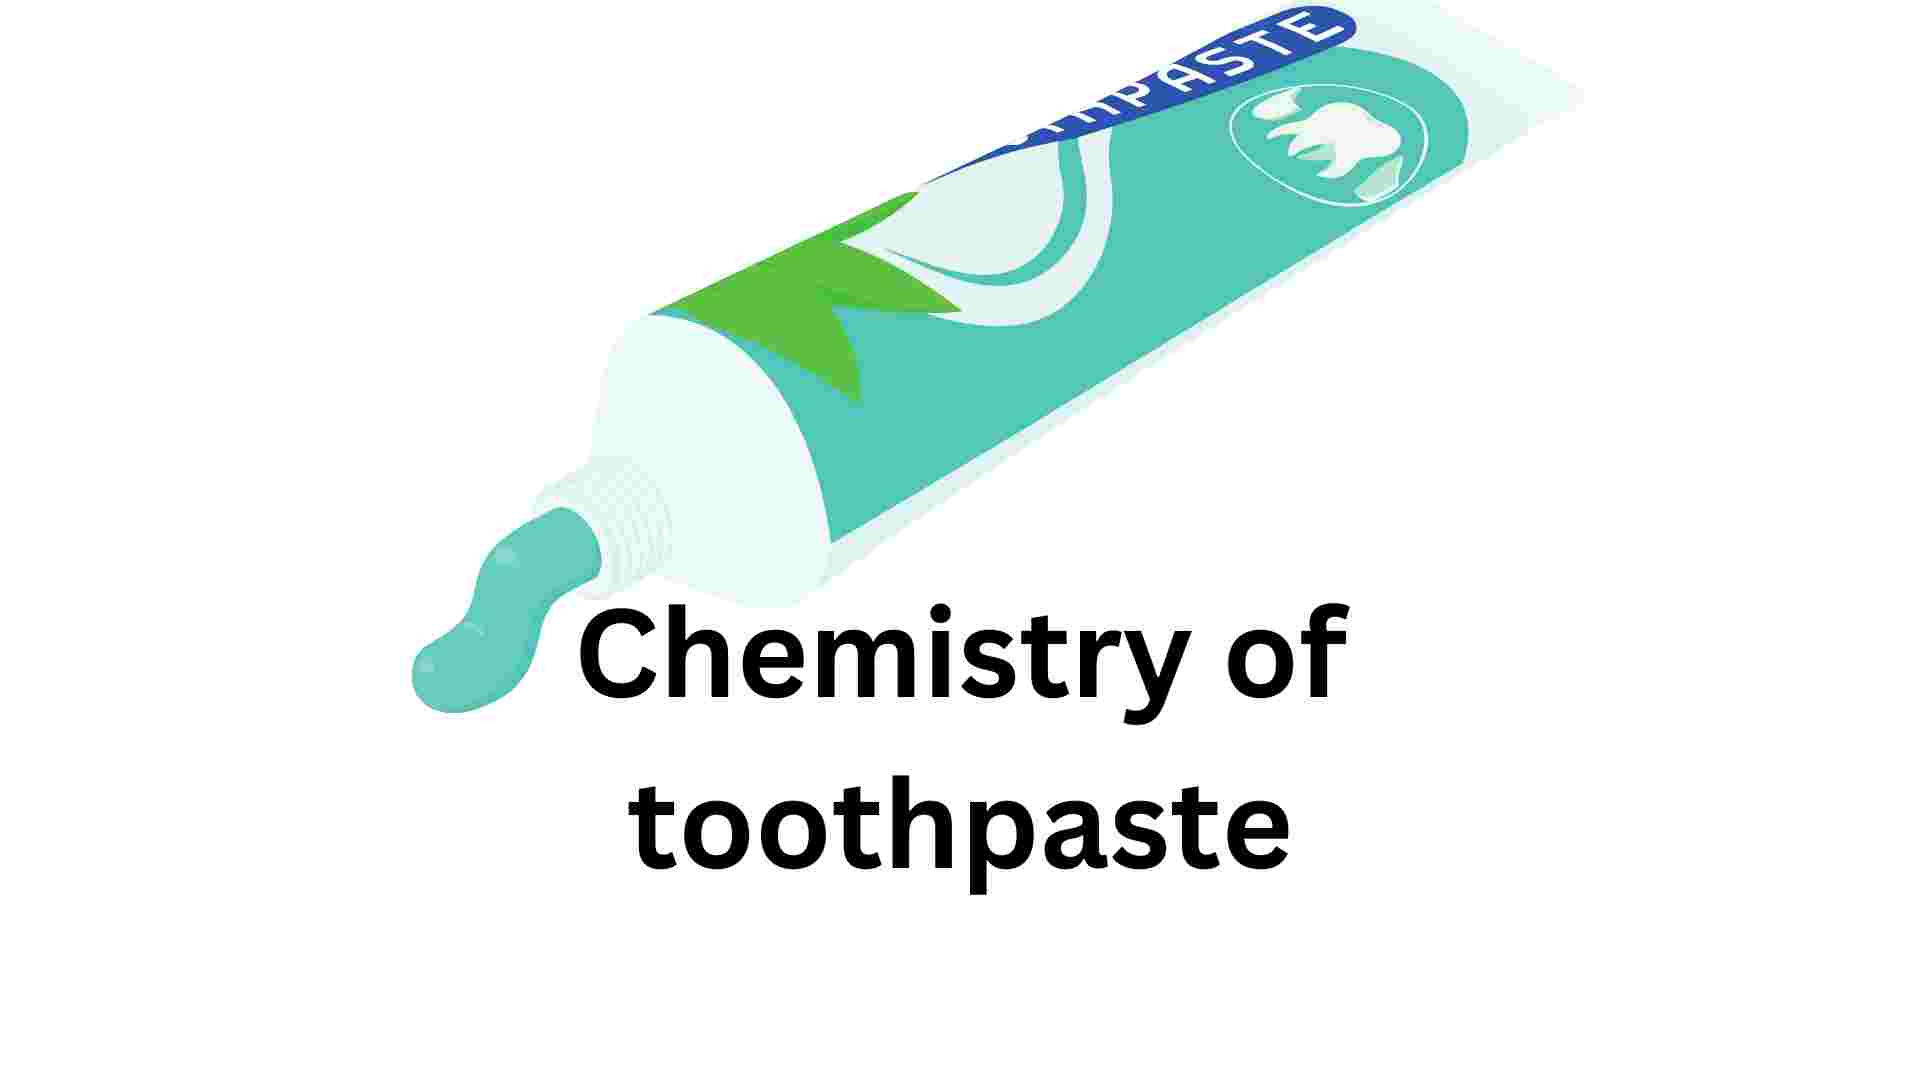 image showing chemistry of toothpaste